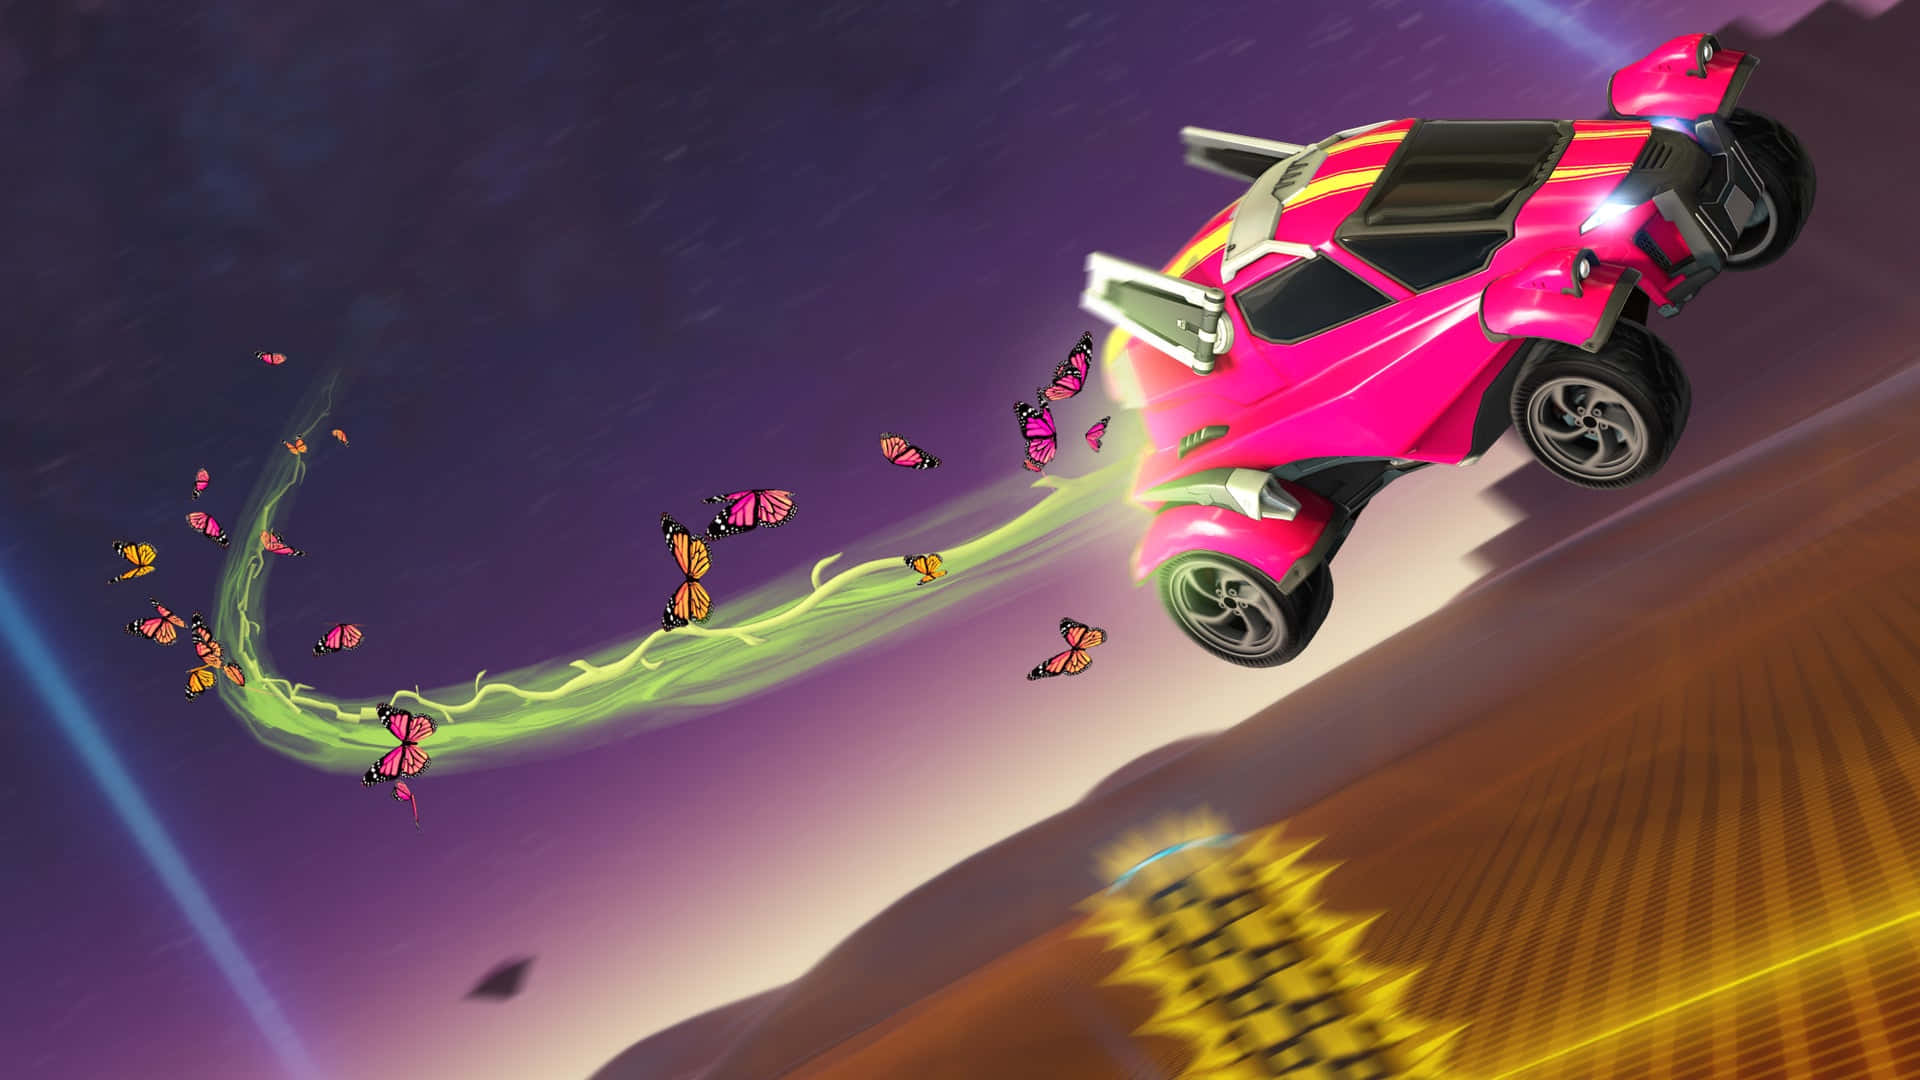 Take rocket-powered cars to soaring heights in Rocket League